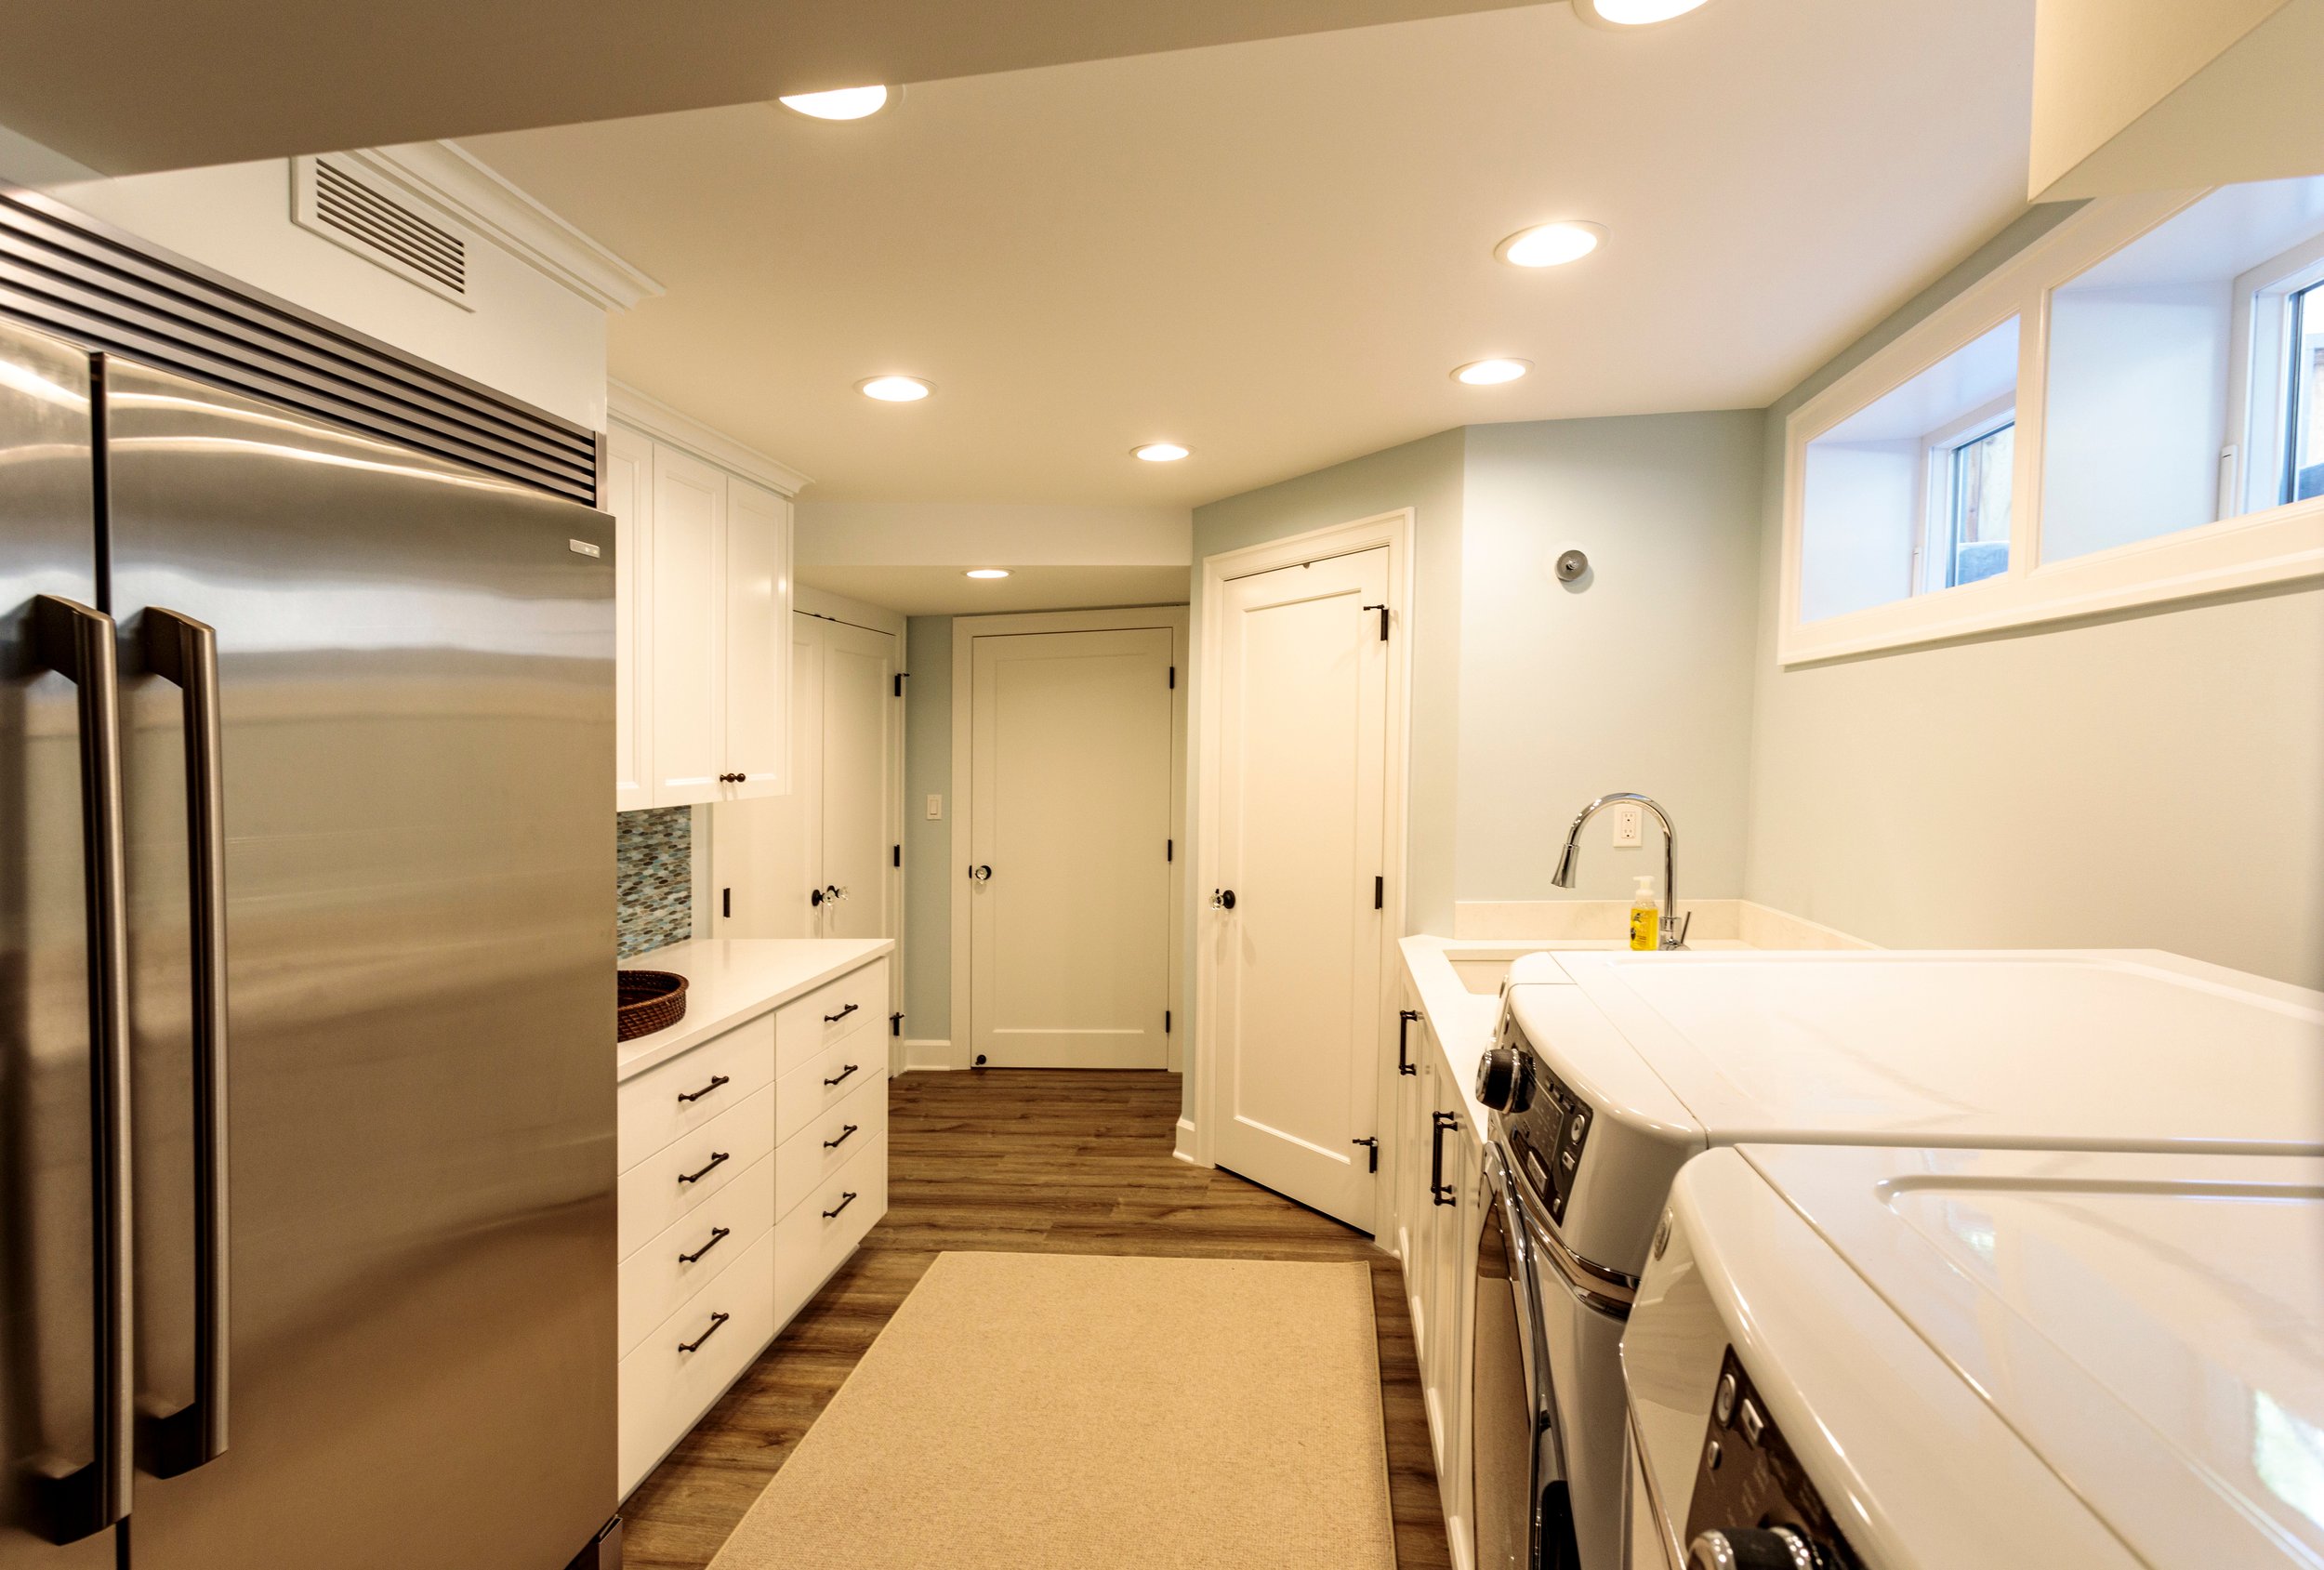 Basement: Large laundry room contains a full sized refrigerator and freezer along with a large closet for auxiliary pantry storage.